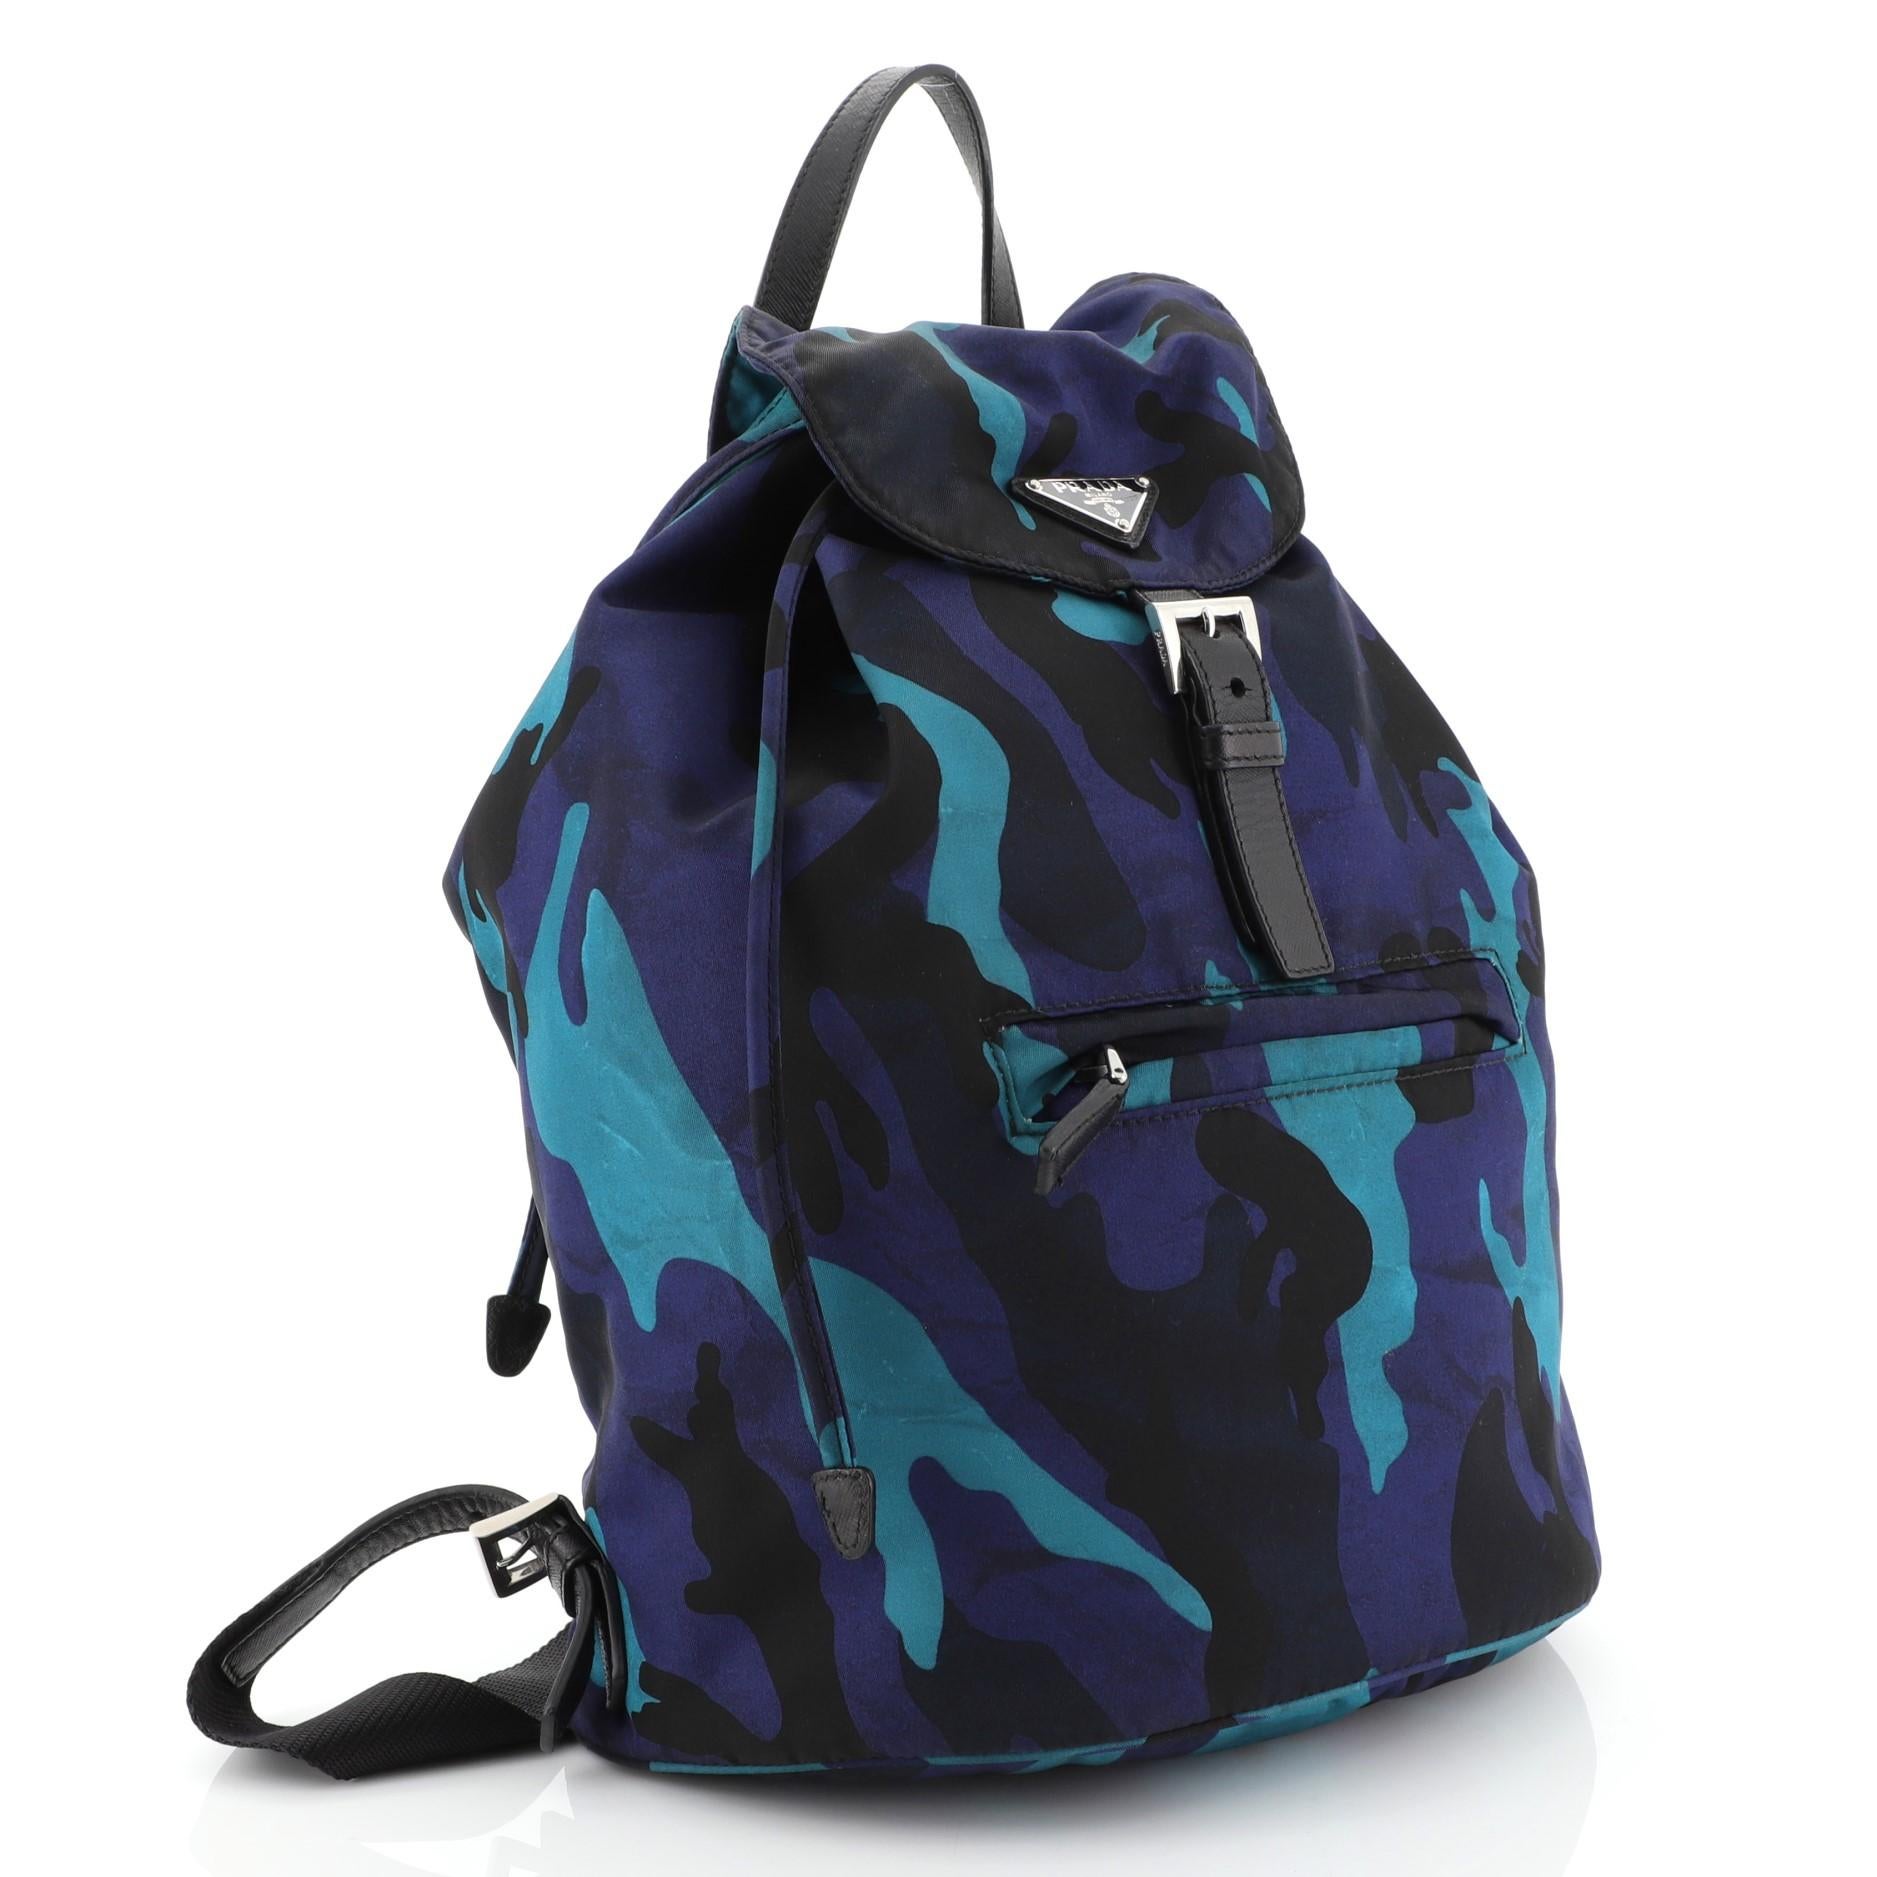 This Prada Camouflage Backpack Tessuto Large, crafted in blue Camouflage tessuto, features a top carry handle, adjustable back shoulder straps, buckle flap, exterior front zip pocket, and silver-tone hardware. Its drawstring closure opens to a black